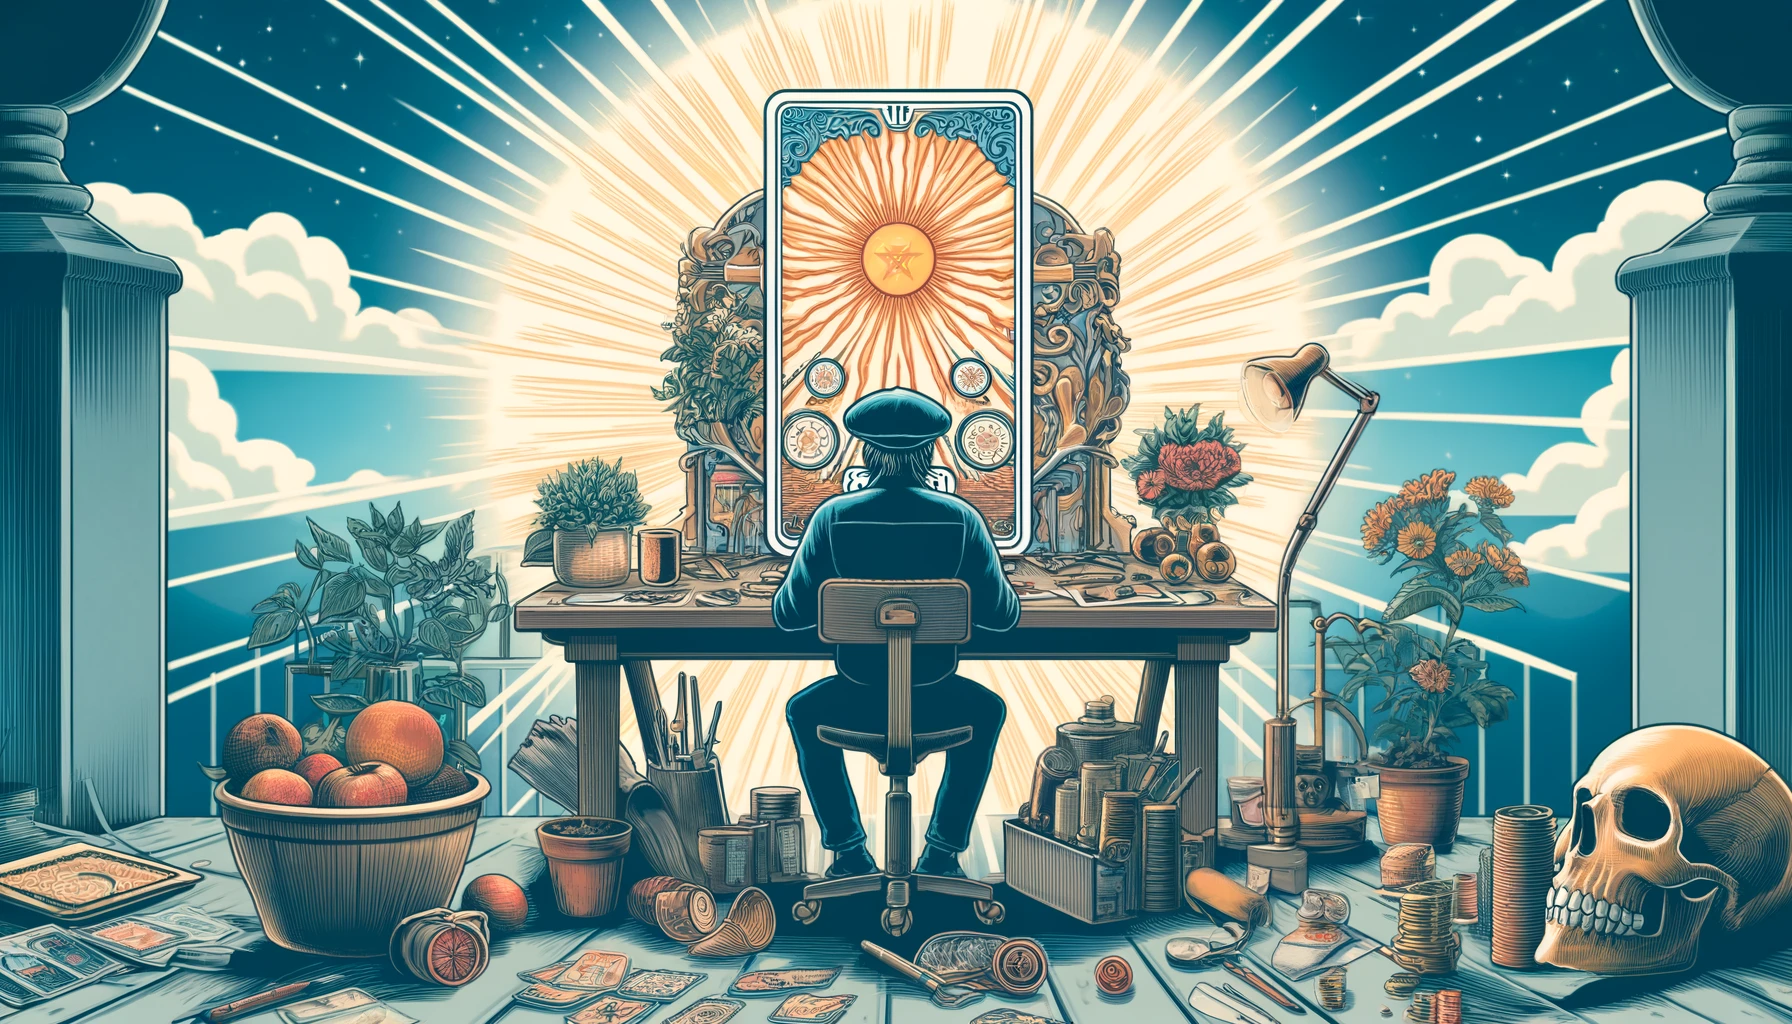 The image depicts an individual immersed in their work, surrounded by tools and symbols of their craft. Their focused expression reflects dedication and determination, while completed projects and achievements in the background signify progress and success. This scene embodies the essence of dedication, focus, and personal achievement, evoking feelings of deep emotional satisfaction and pride from mastering a skill or completing a challenging task. The environment suggests a space of creativity and productivity, conveying a sense of accomplishment, fulfillment, and the emotional depth associated with being fully invested in one's pursuits.